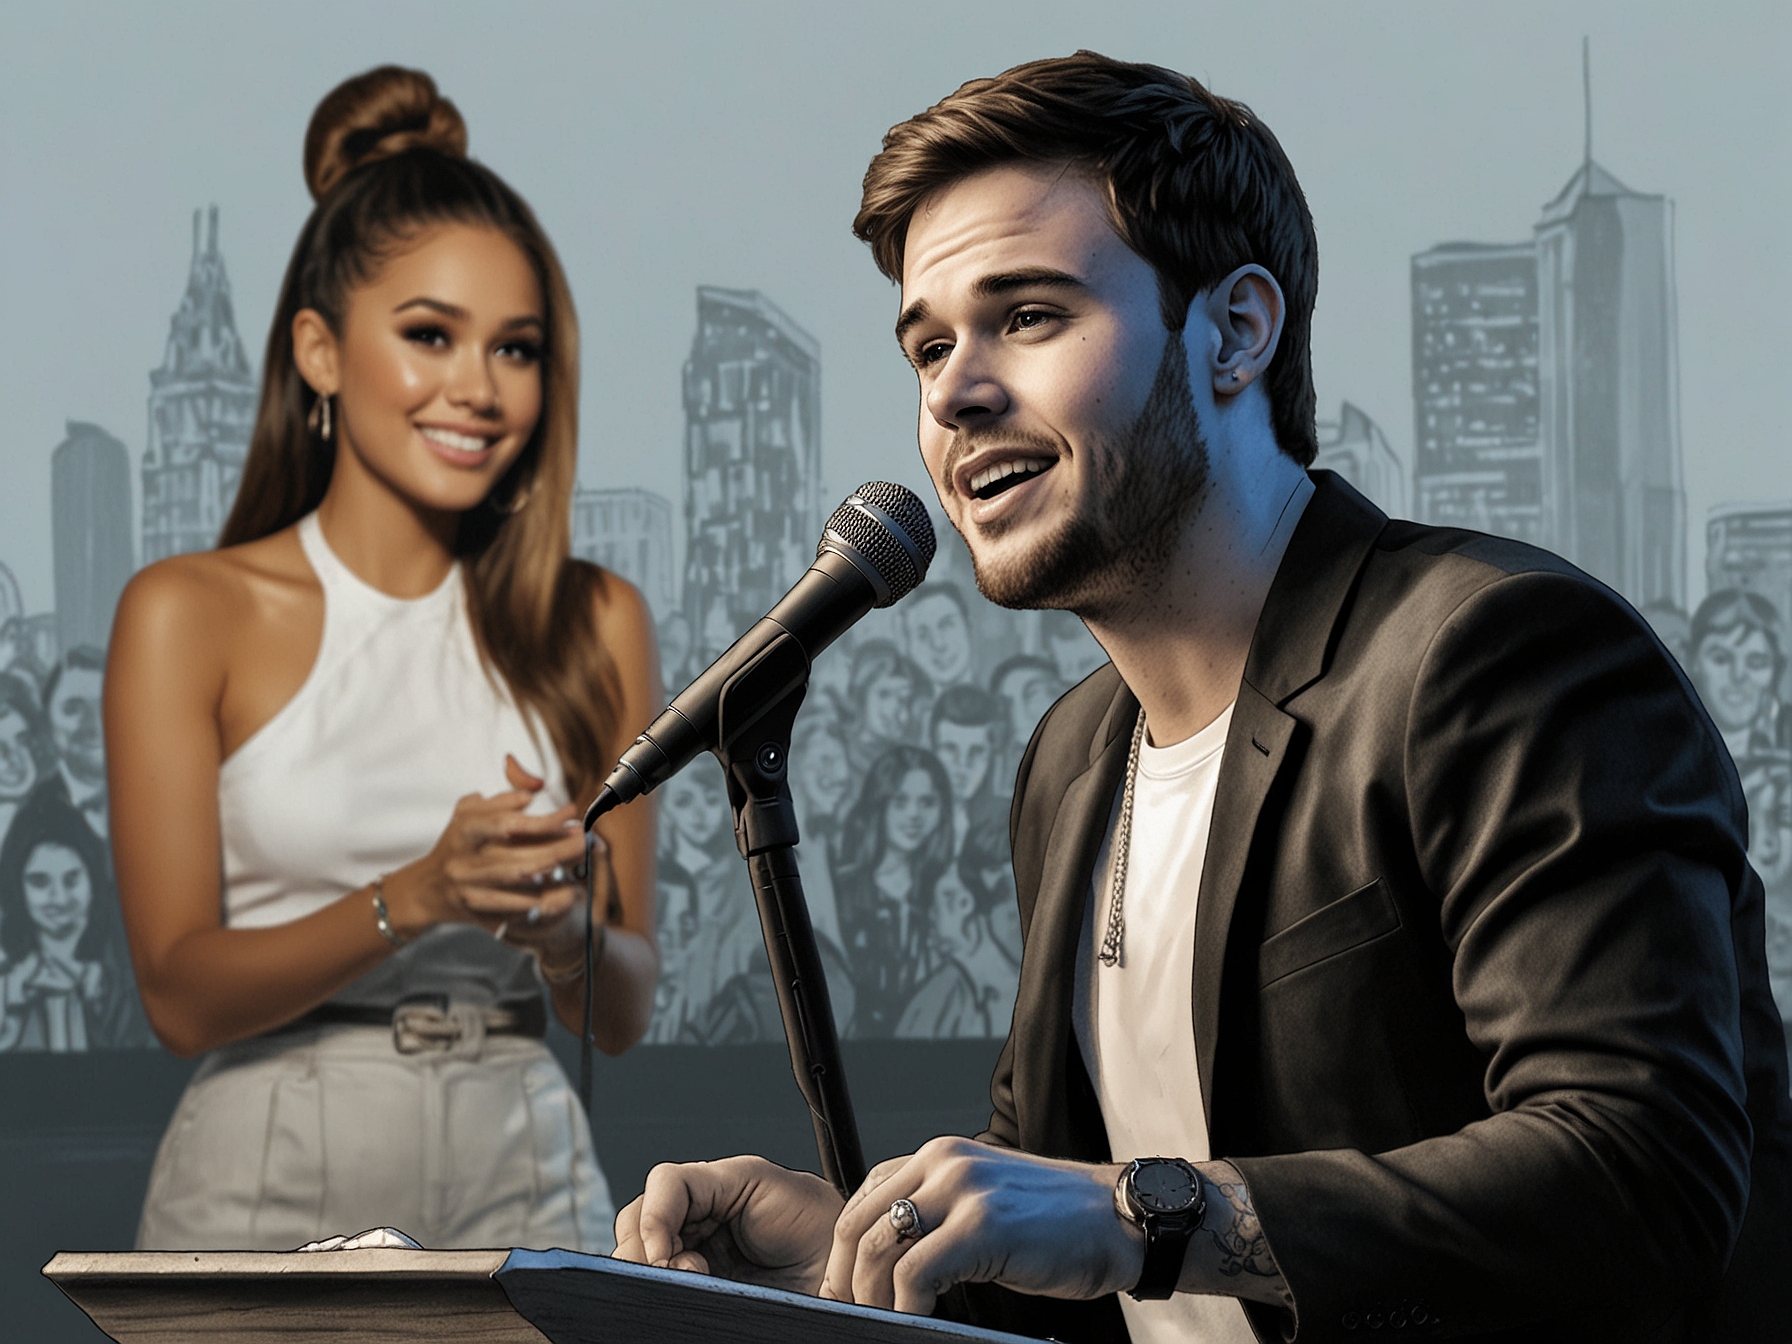 Scooter Braun announcing his retirement from music management at a press conference, with images of Justin Bieber and Ariana Grande in the background, highlighting his successful career.